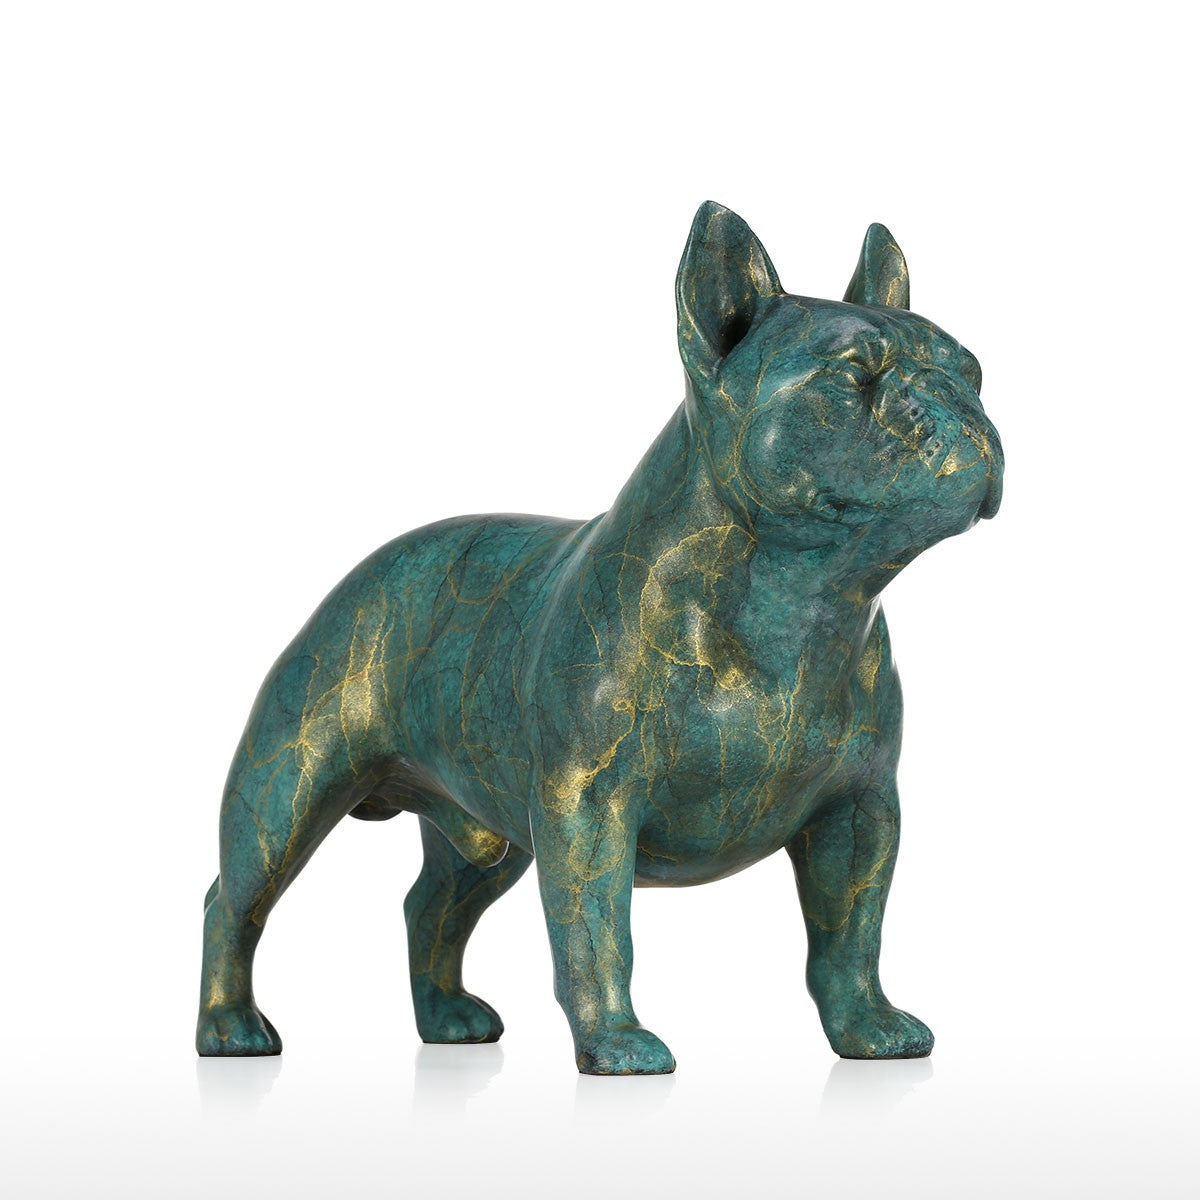 Mery Christmas French Bulldog and French Bulldog Christmas with French Bulldog Statue for Christmas Decorations